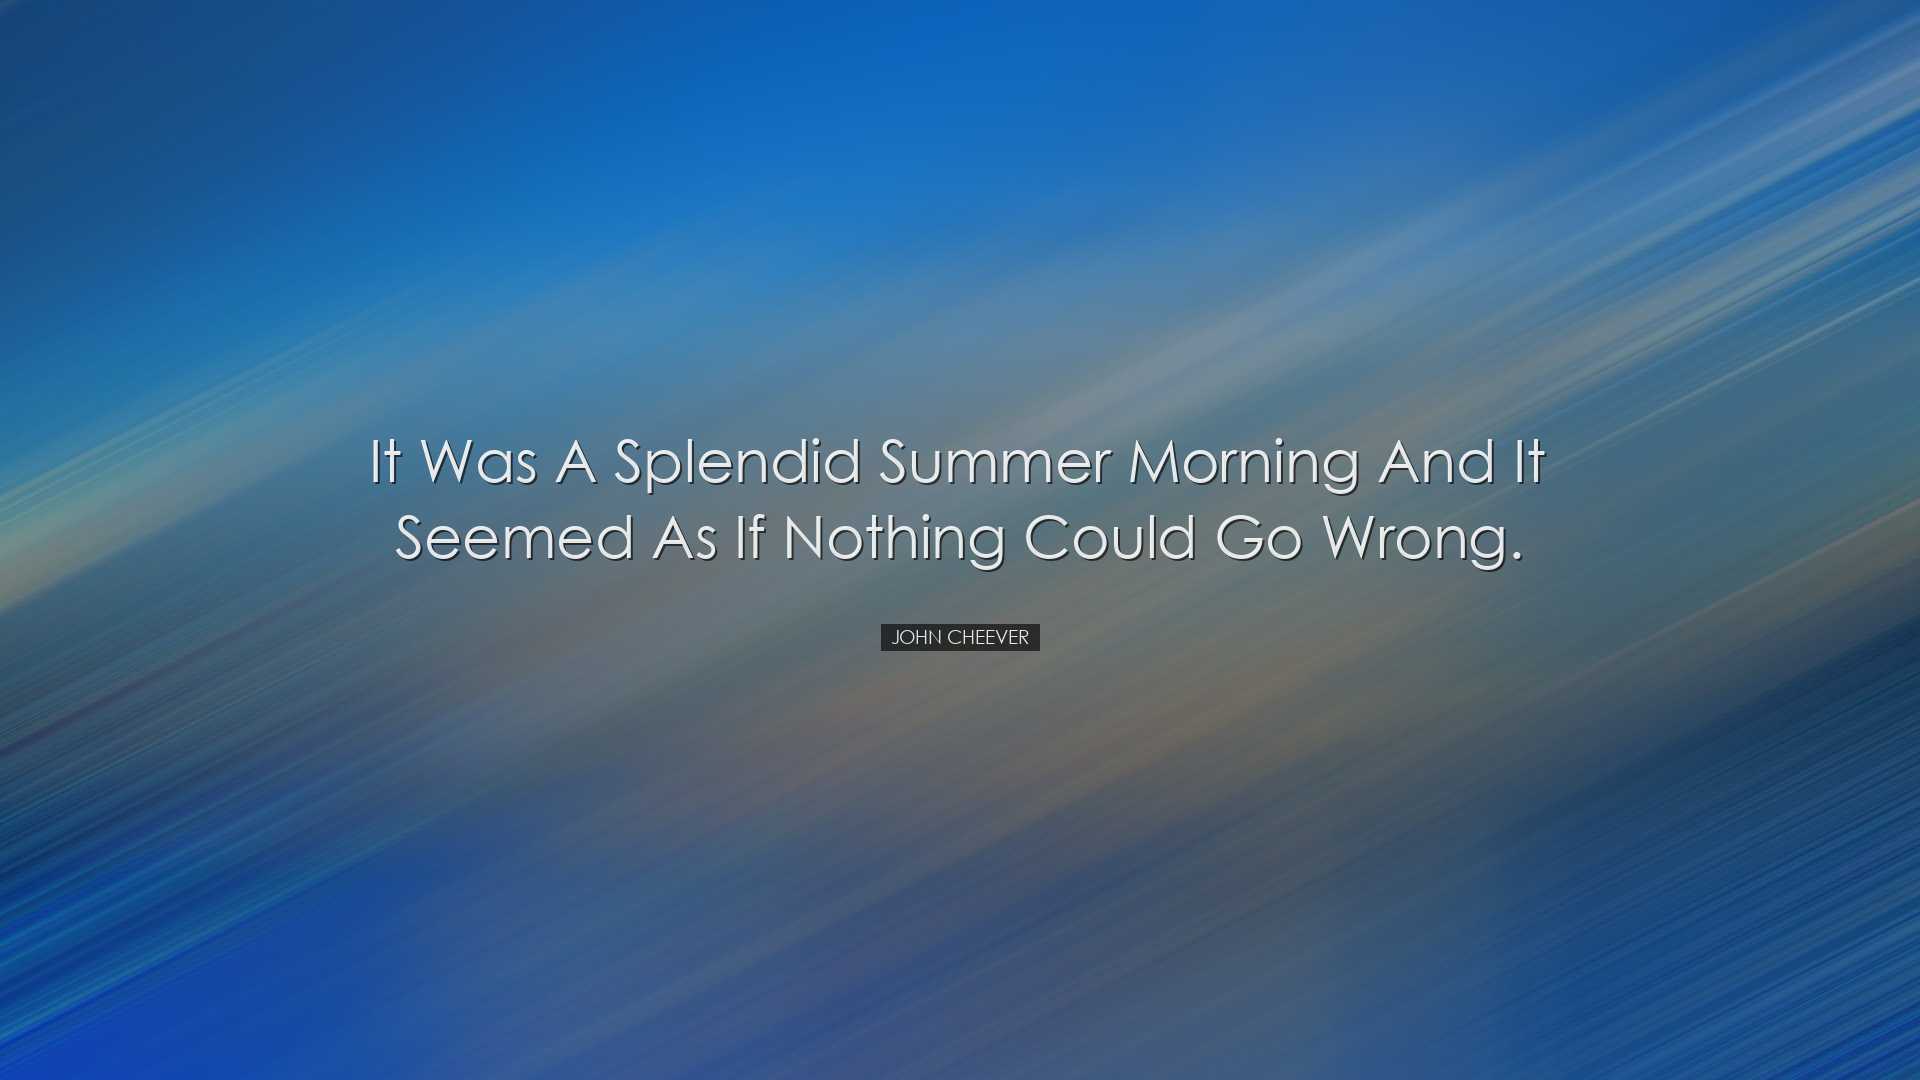 It was a splendid summer morning and it seemed as if nothing could